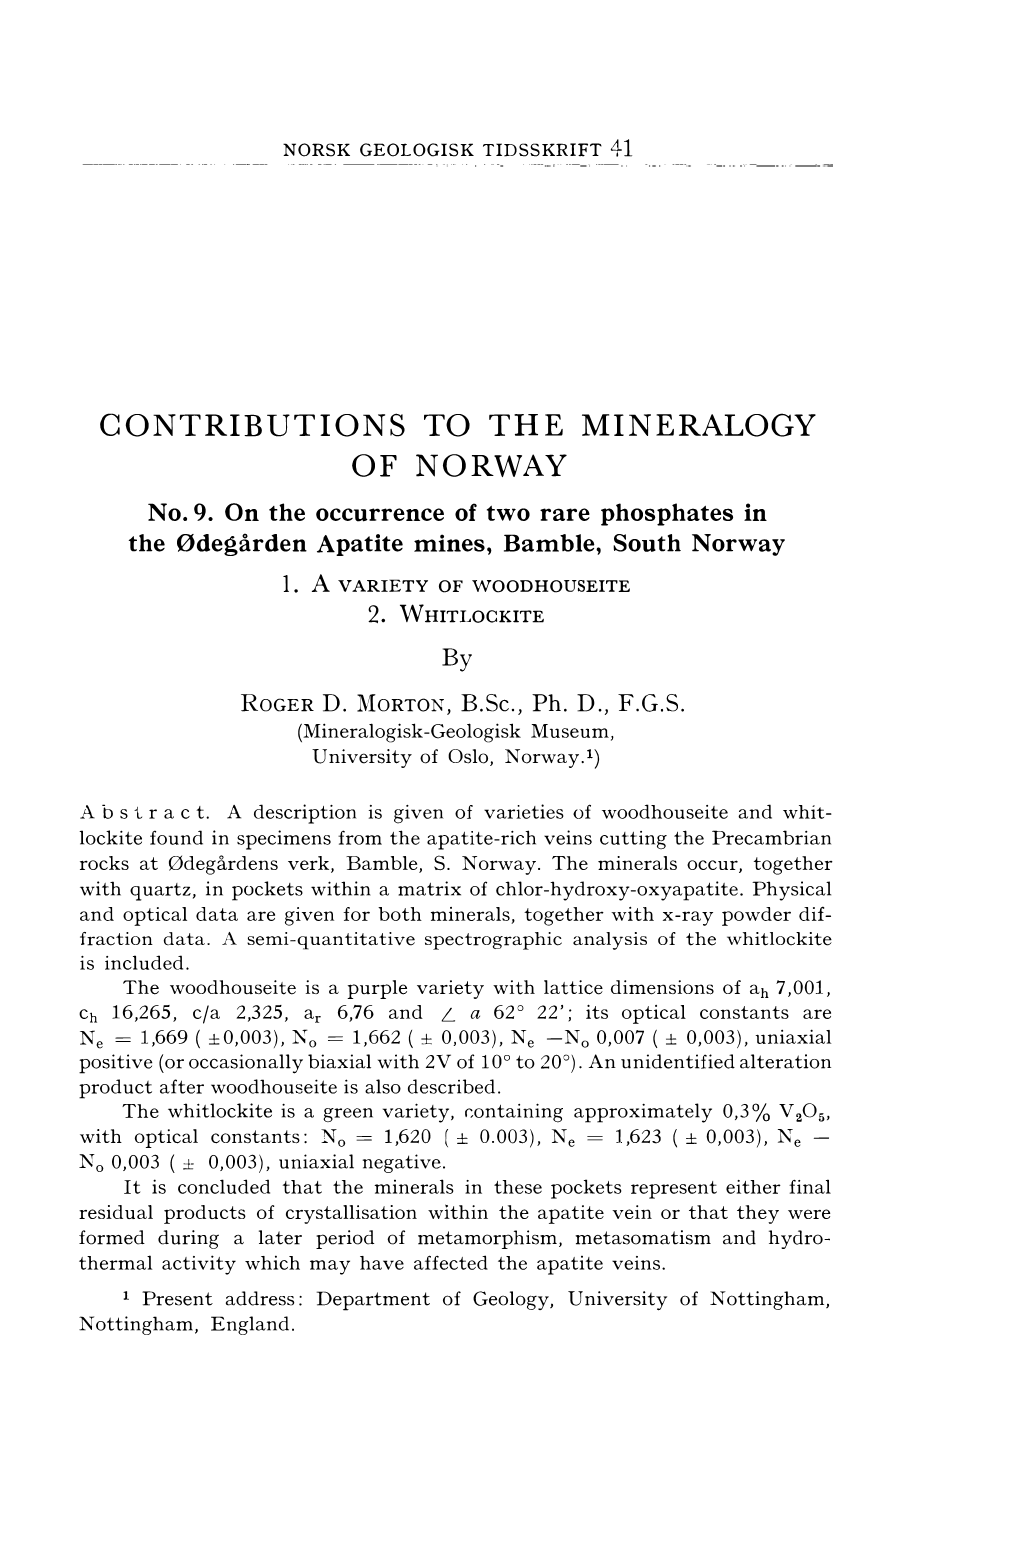 CONTRIBUTIONS to the MINERALOGY of NORWAY By